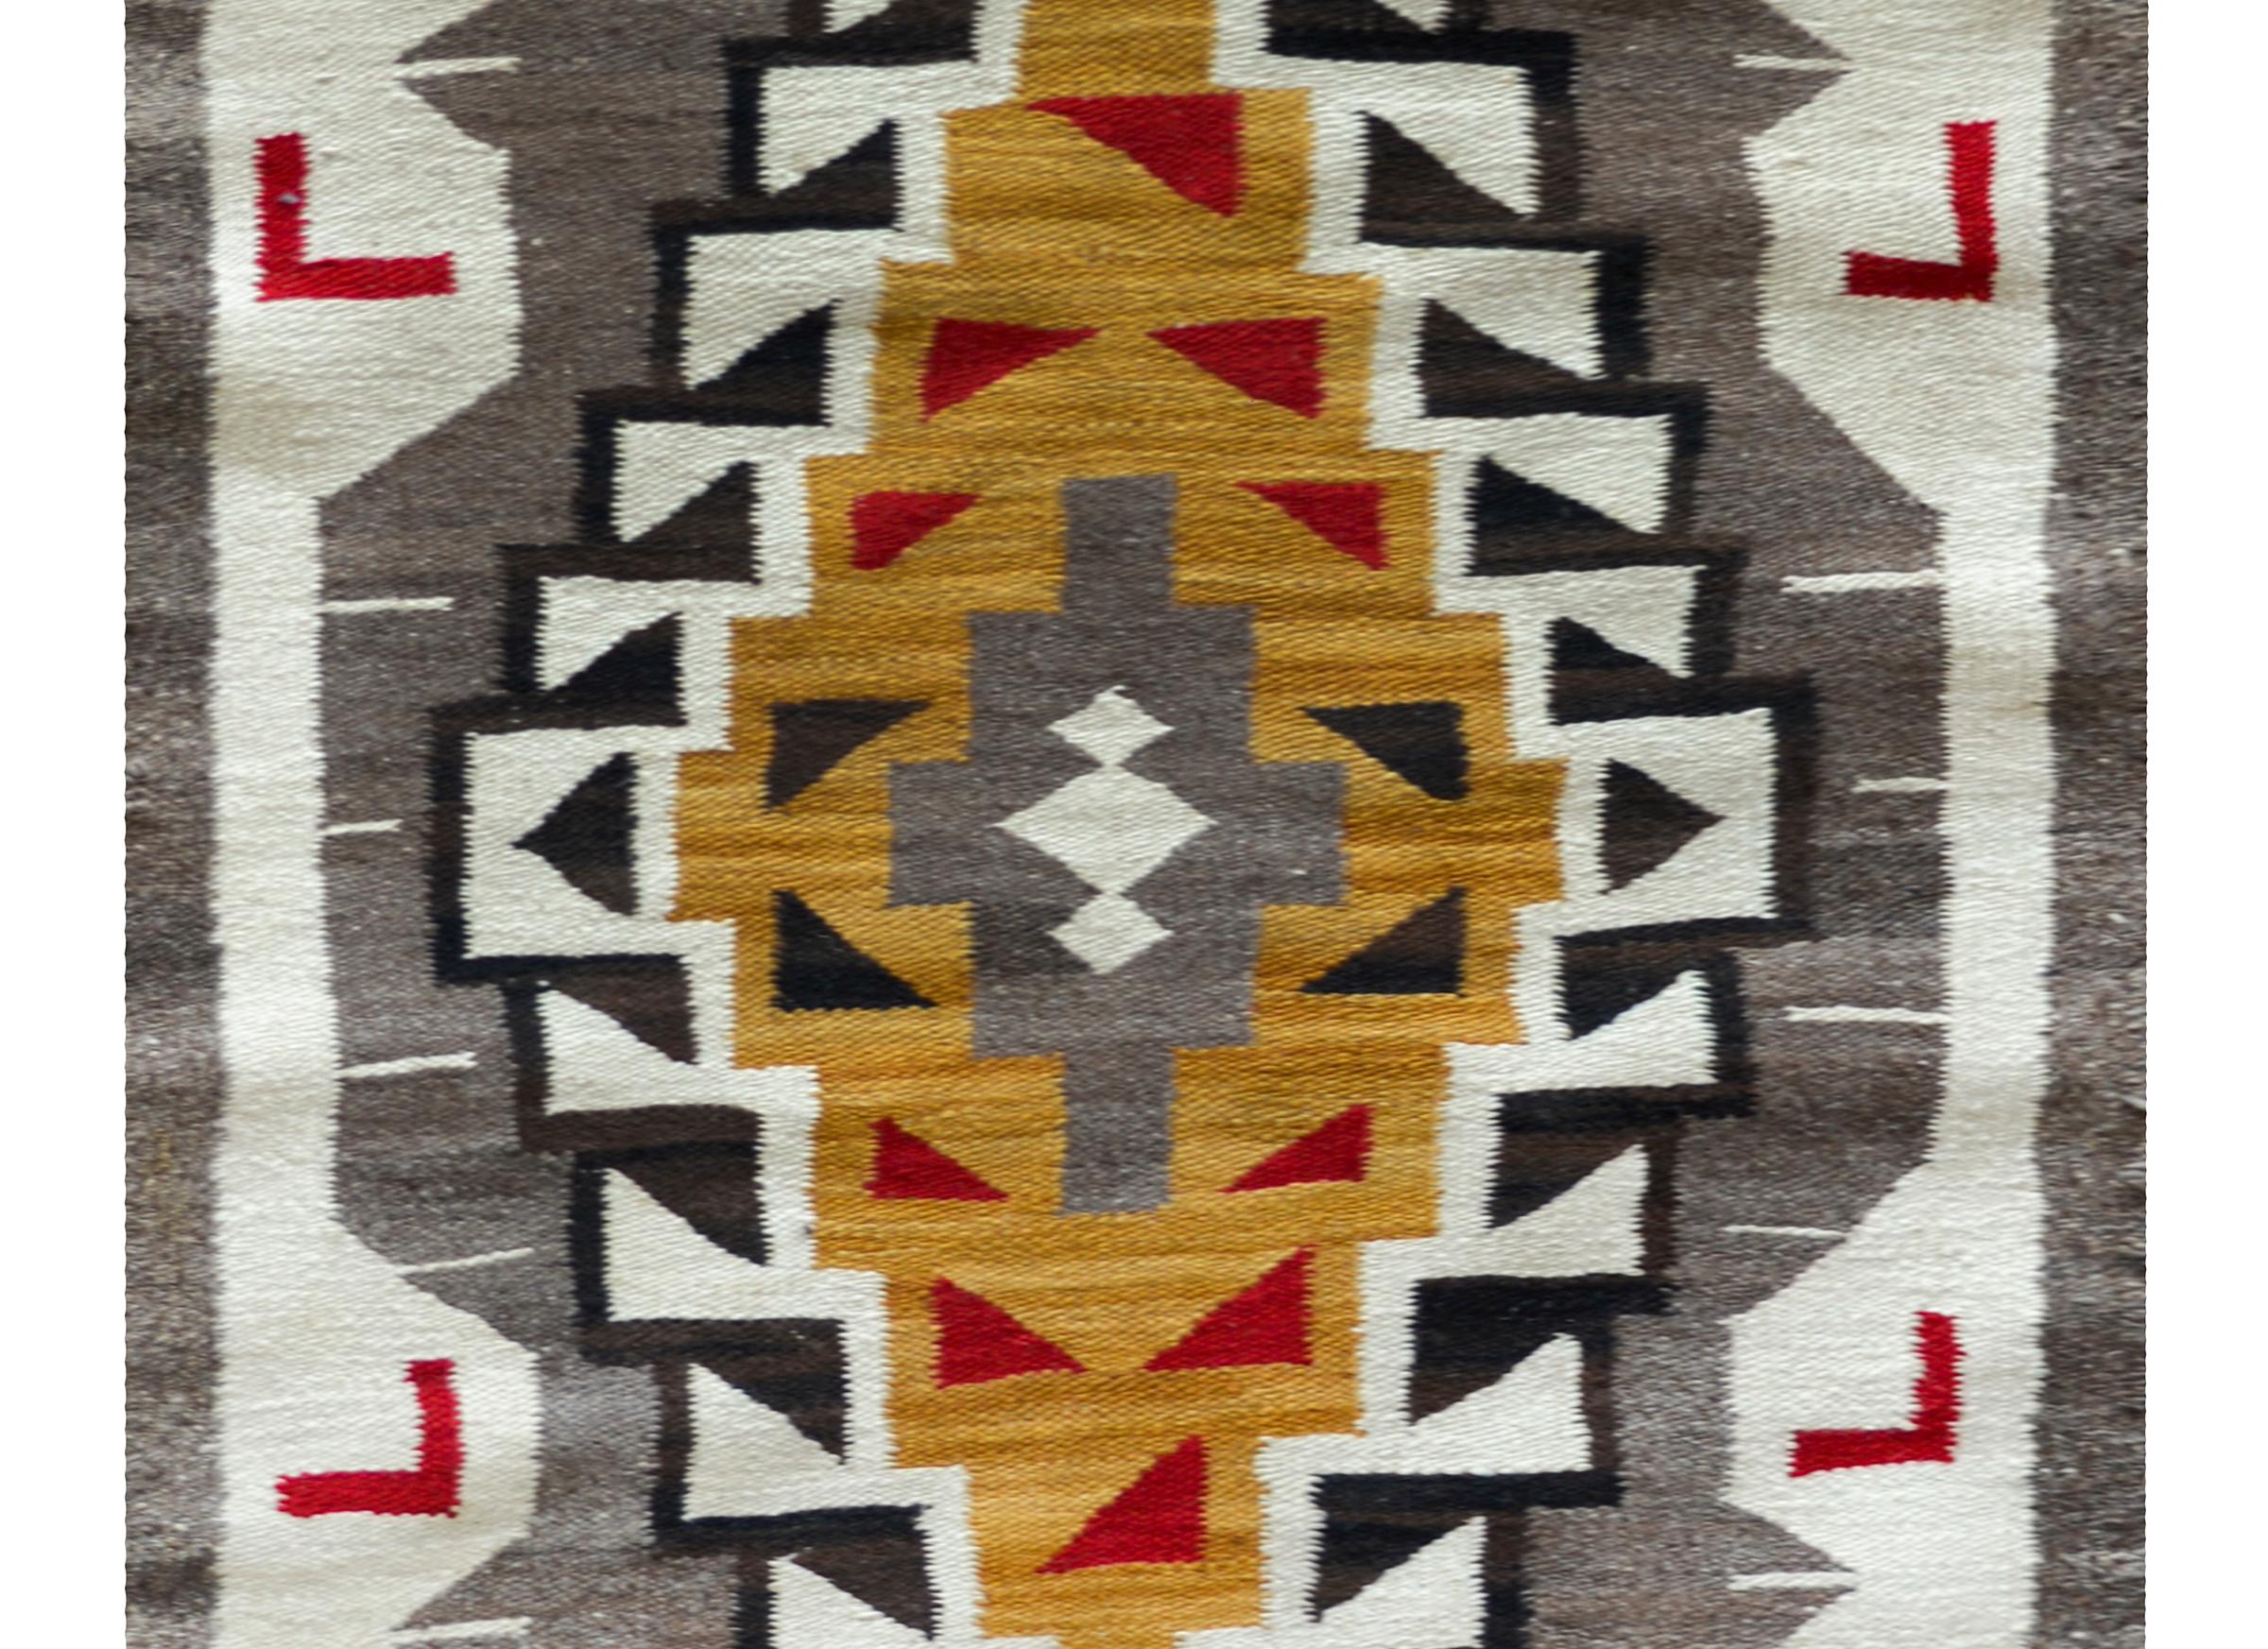 An early 20th century Navajo rug with a wonderful geometric pattern including a large central diamond medallion floating over a gray field and flanked by pairs of orange wings at each end. The border is playful with several red geometric patterns